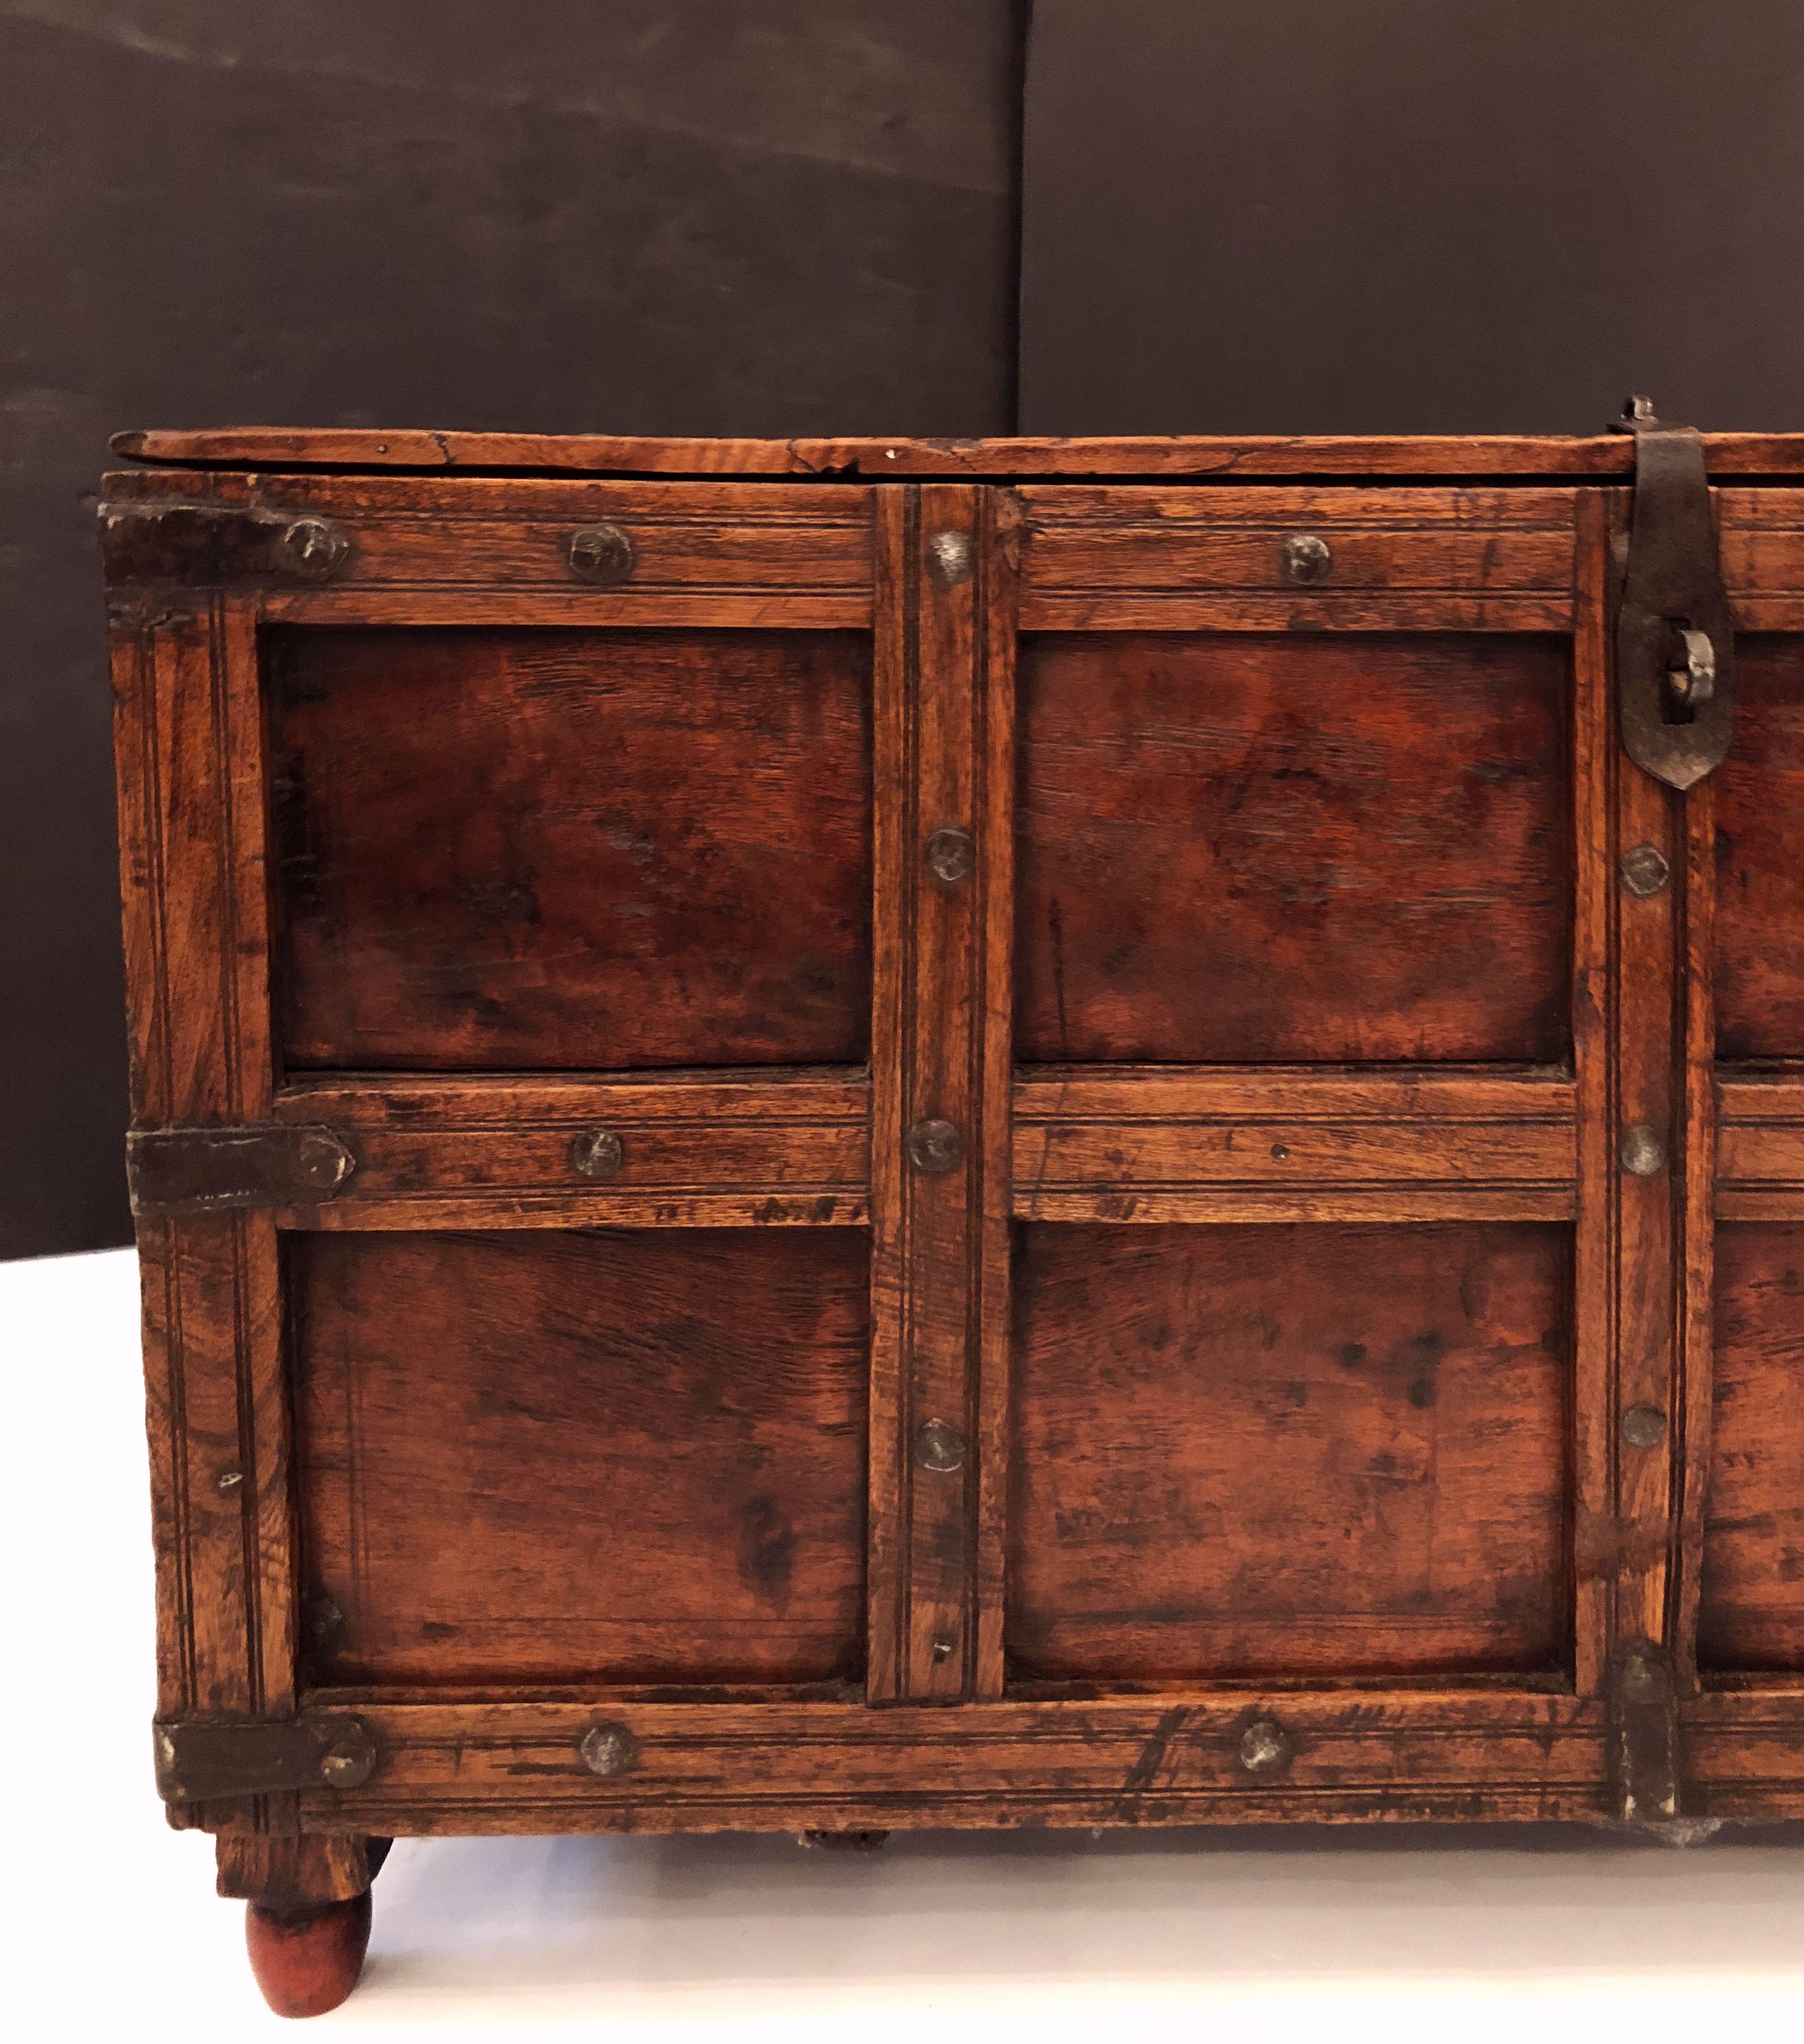 Iron-Bound Stick Box or Trunk from British Colonial India 'The Raj' 8